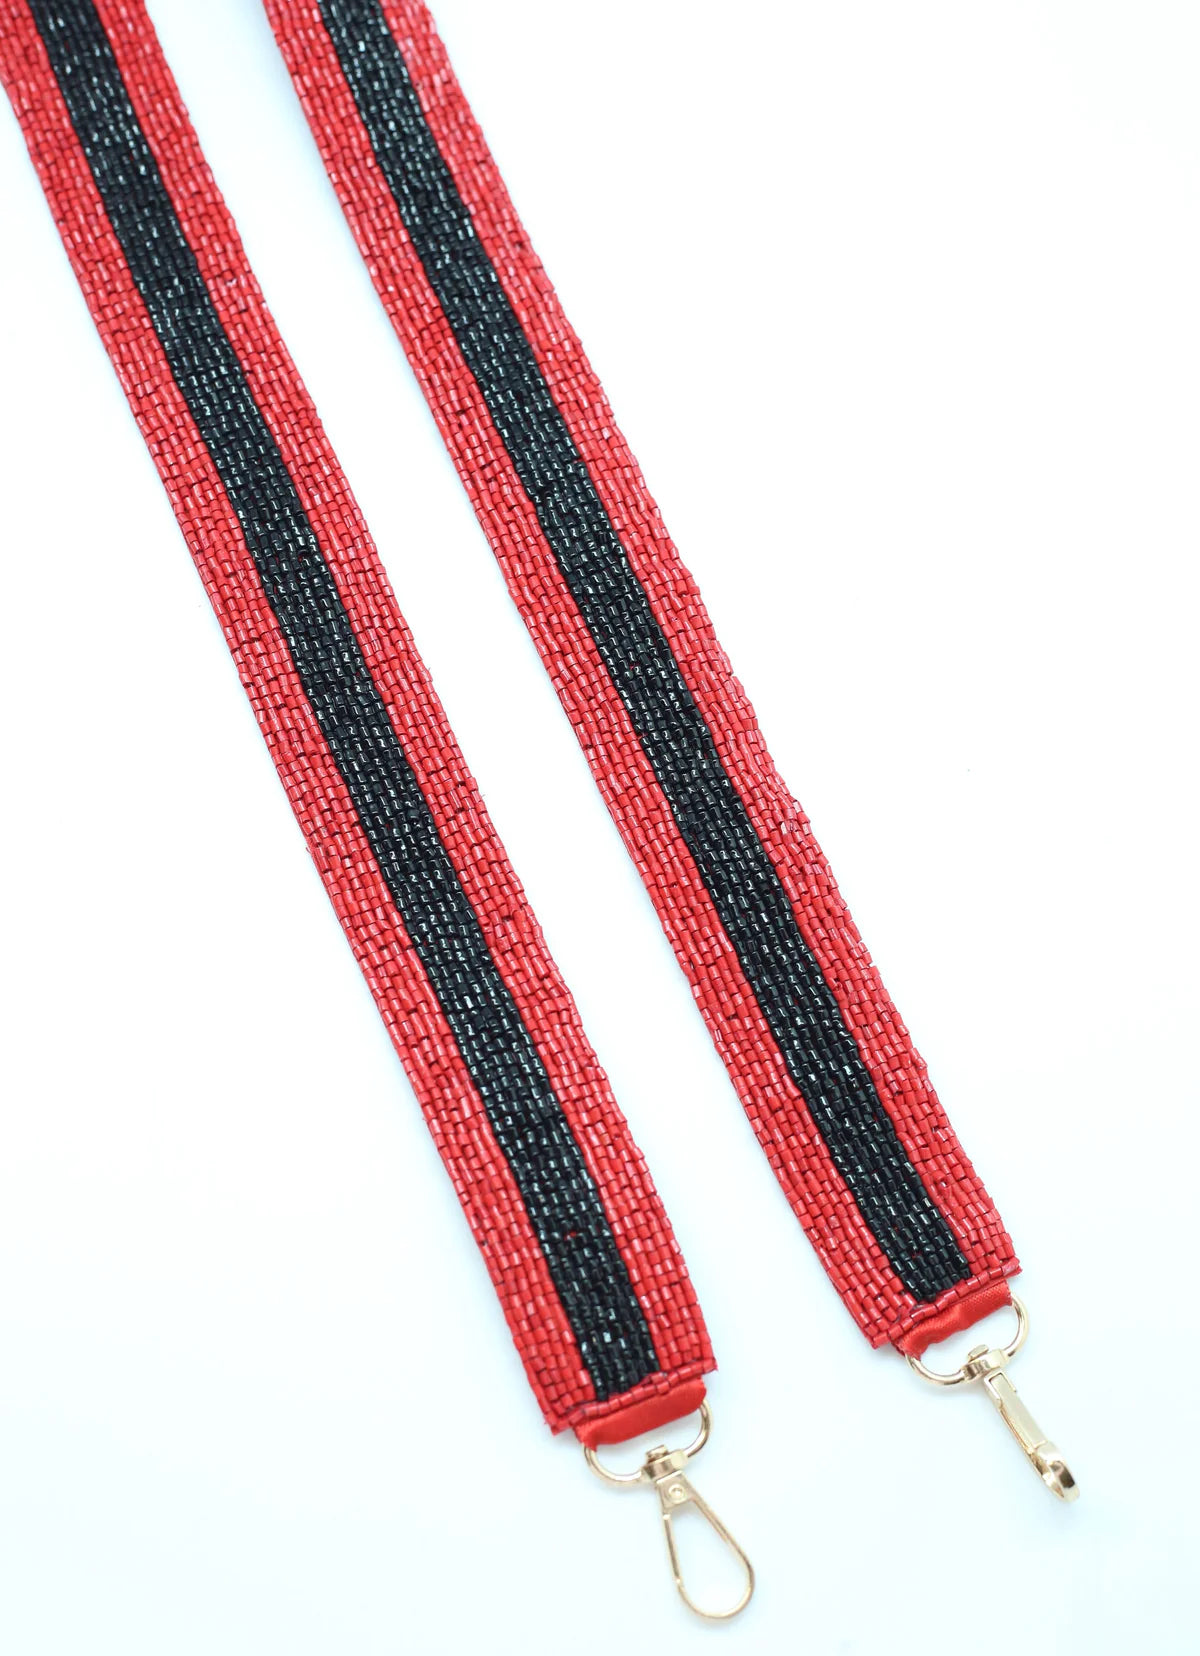 Red & Black Striped Beaded Purse Strap